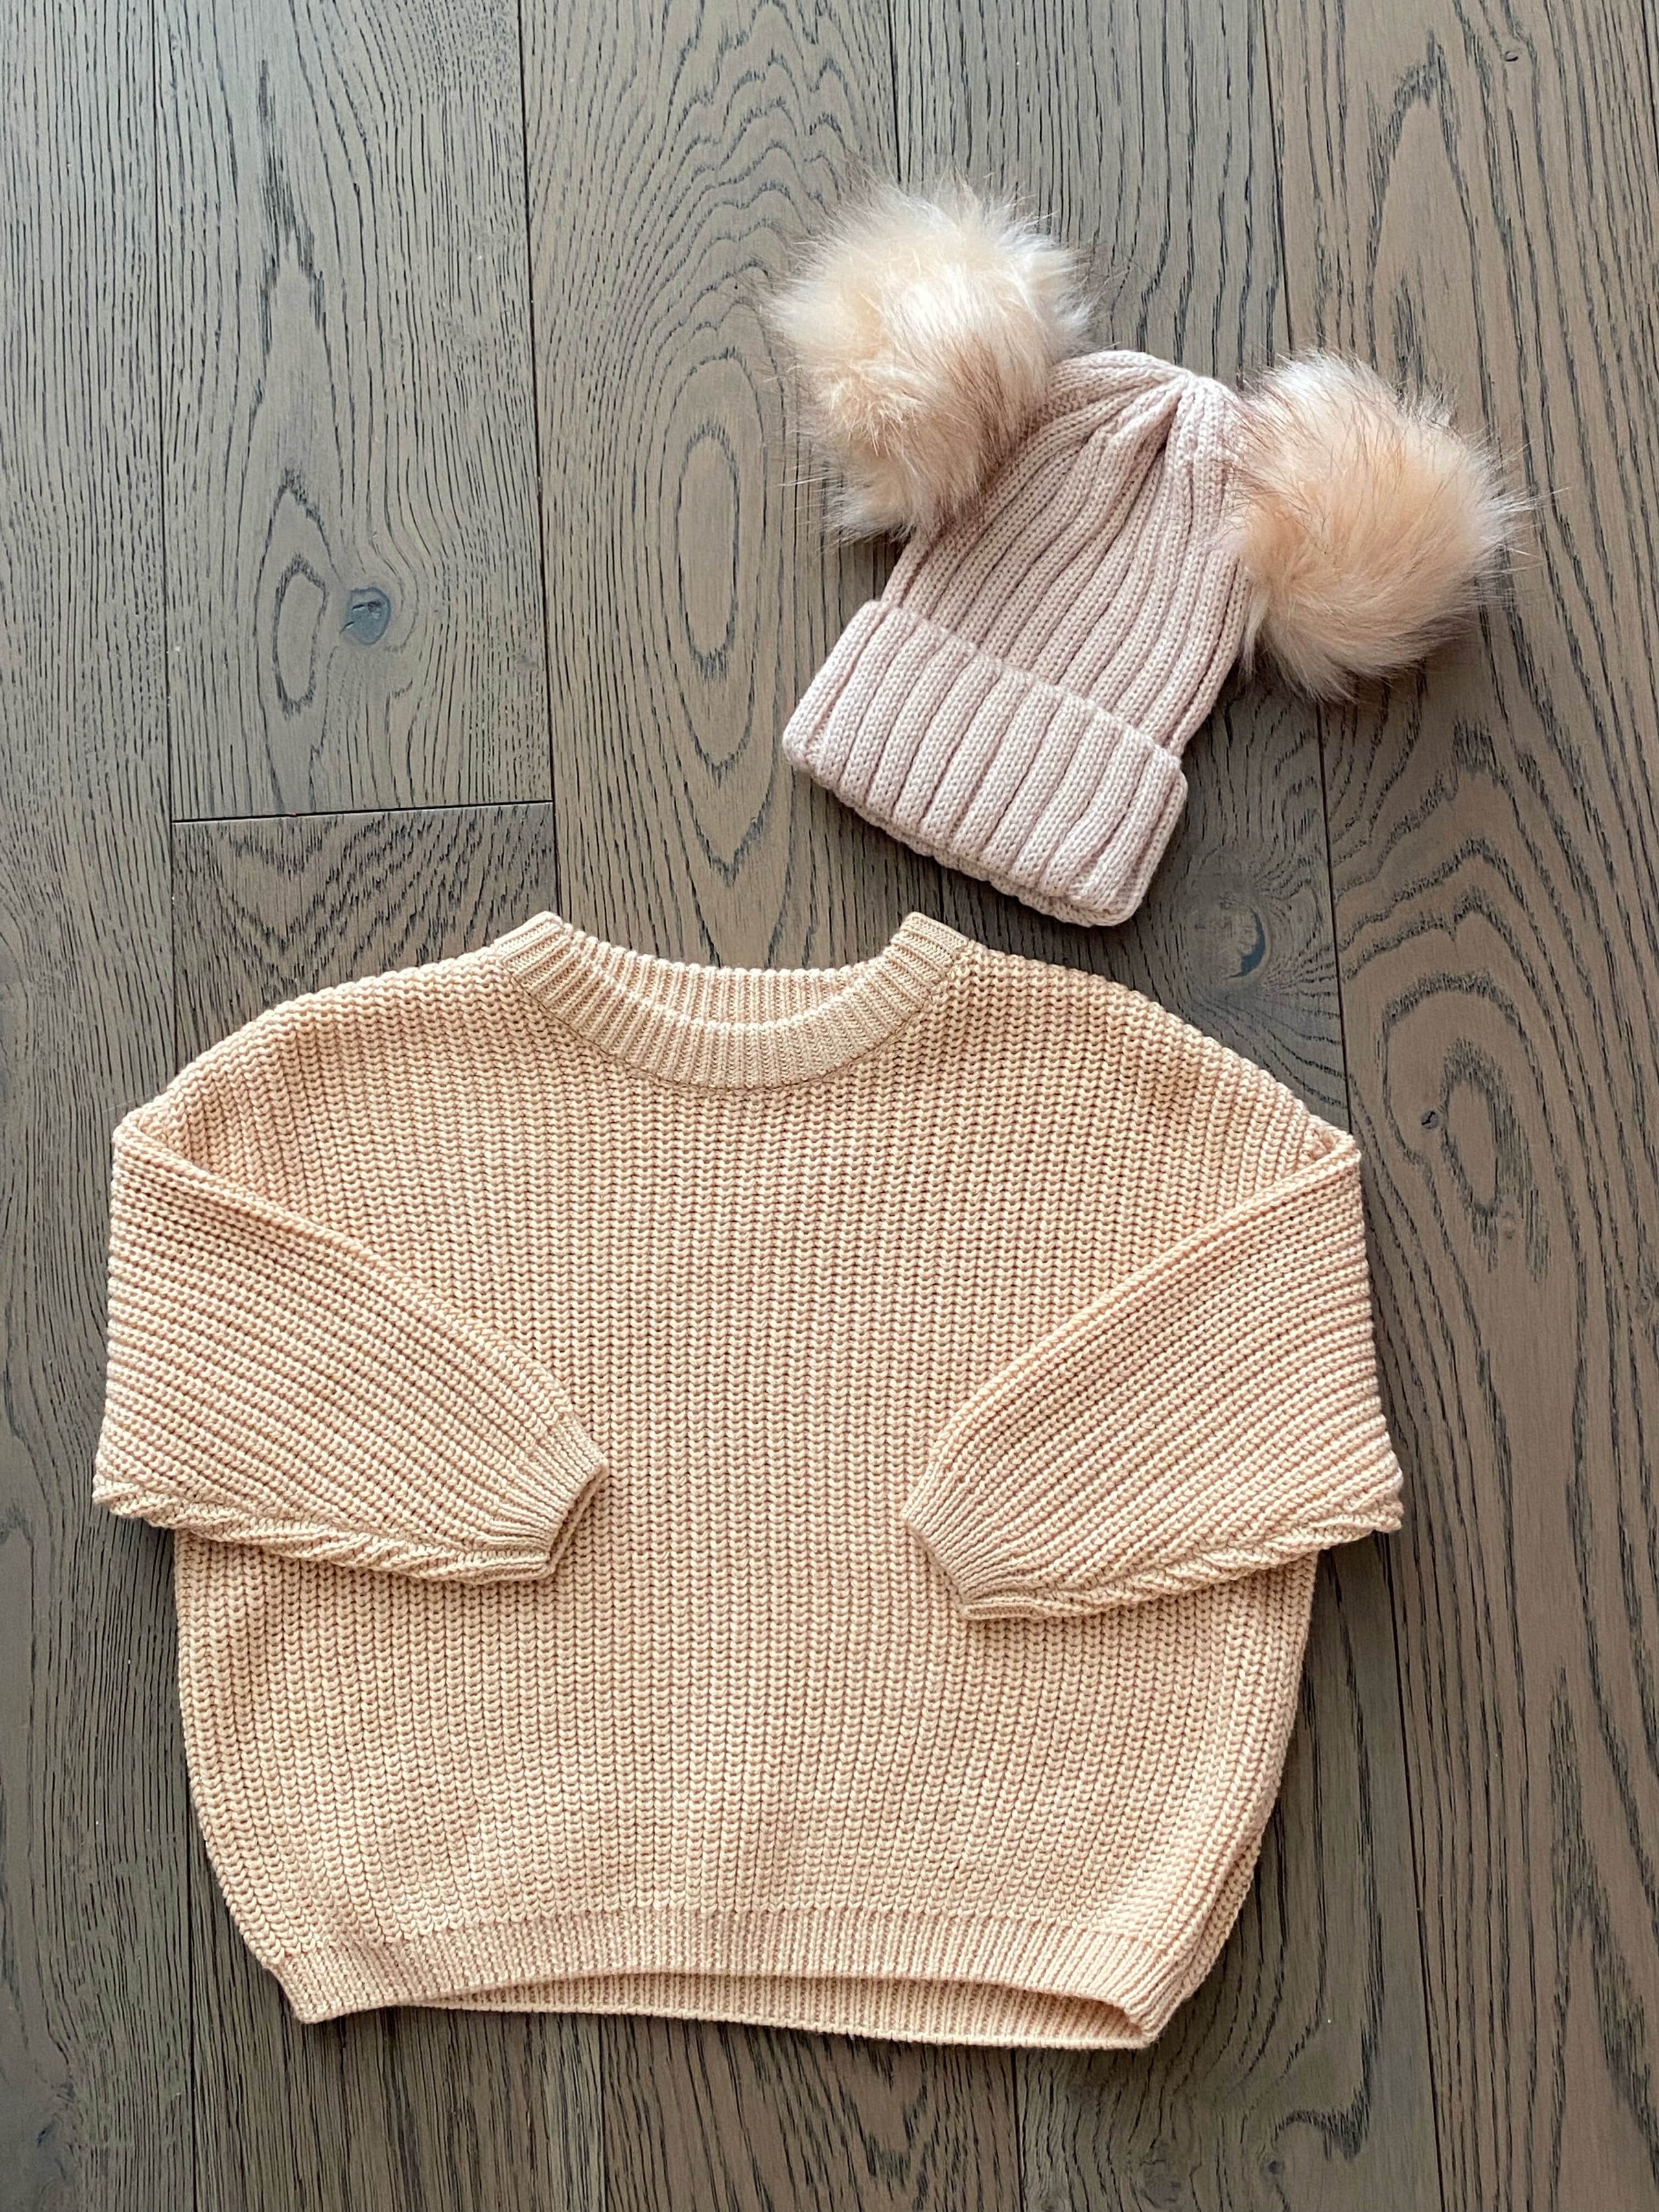 Cozy Knit Sweaters You'll Want to Cocoon in This Fall & Winter » coco bassey